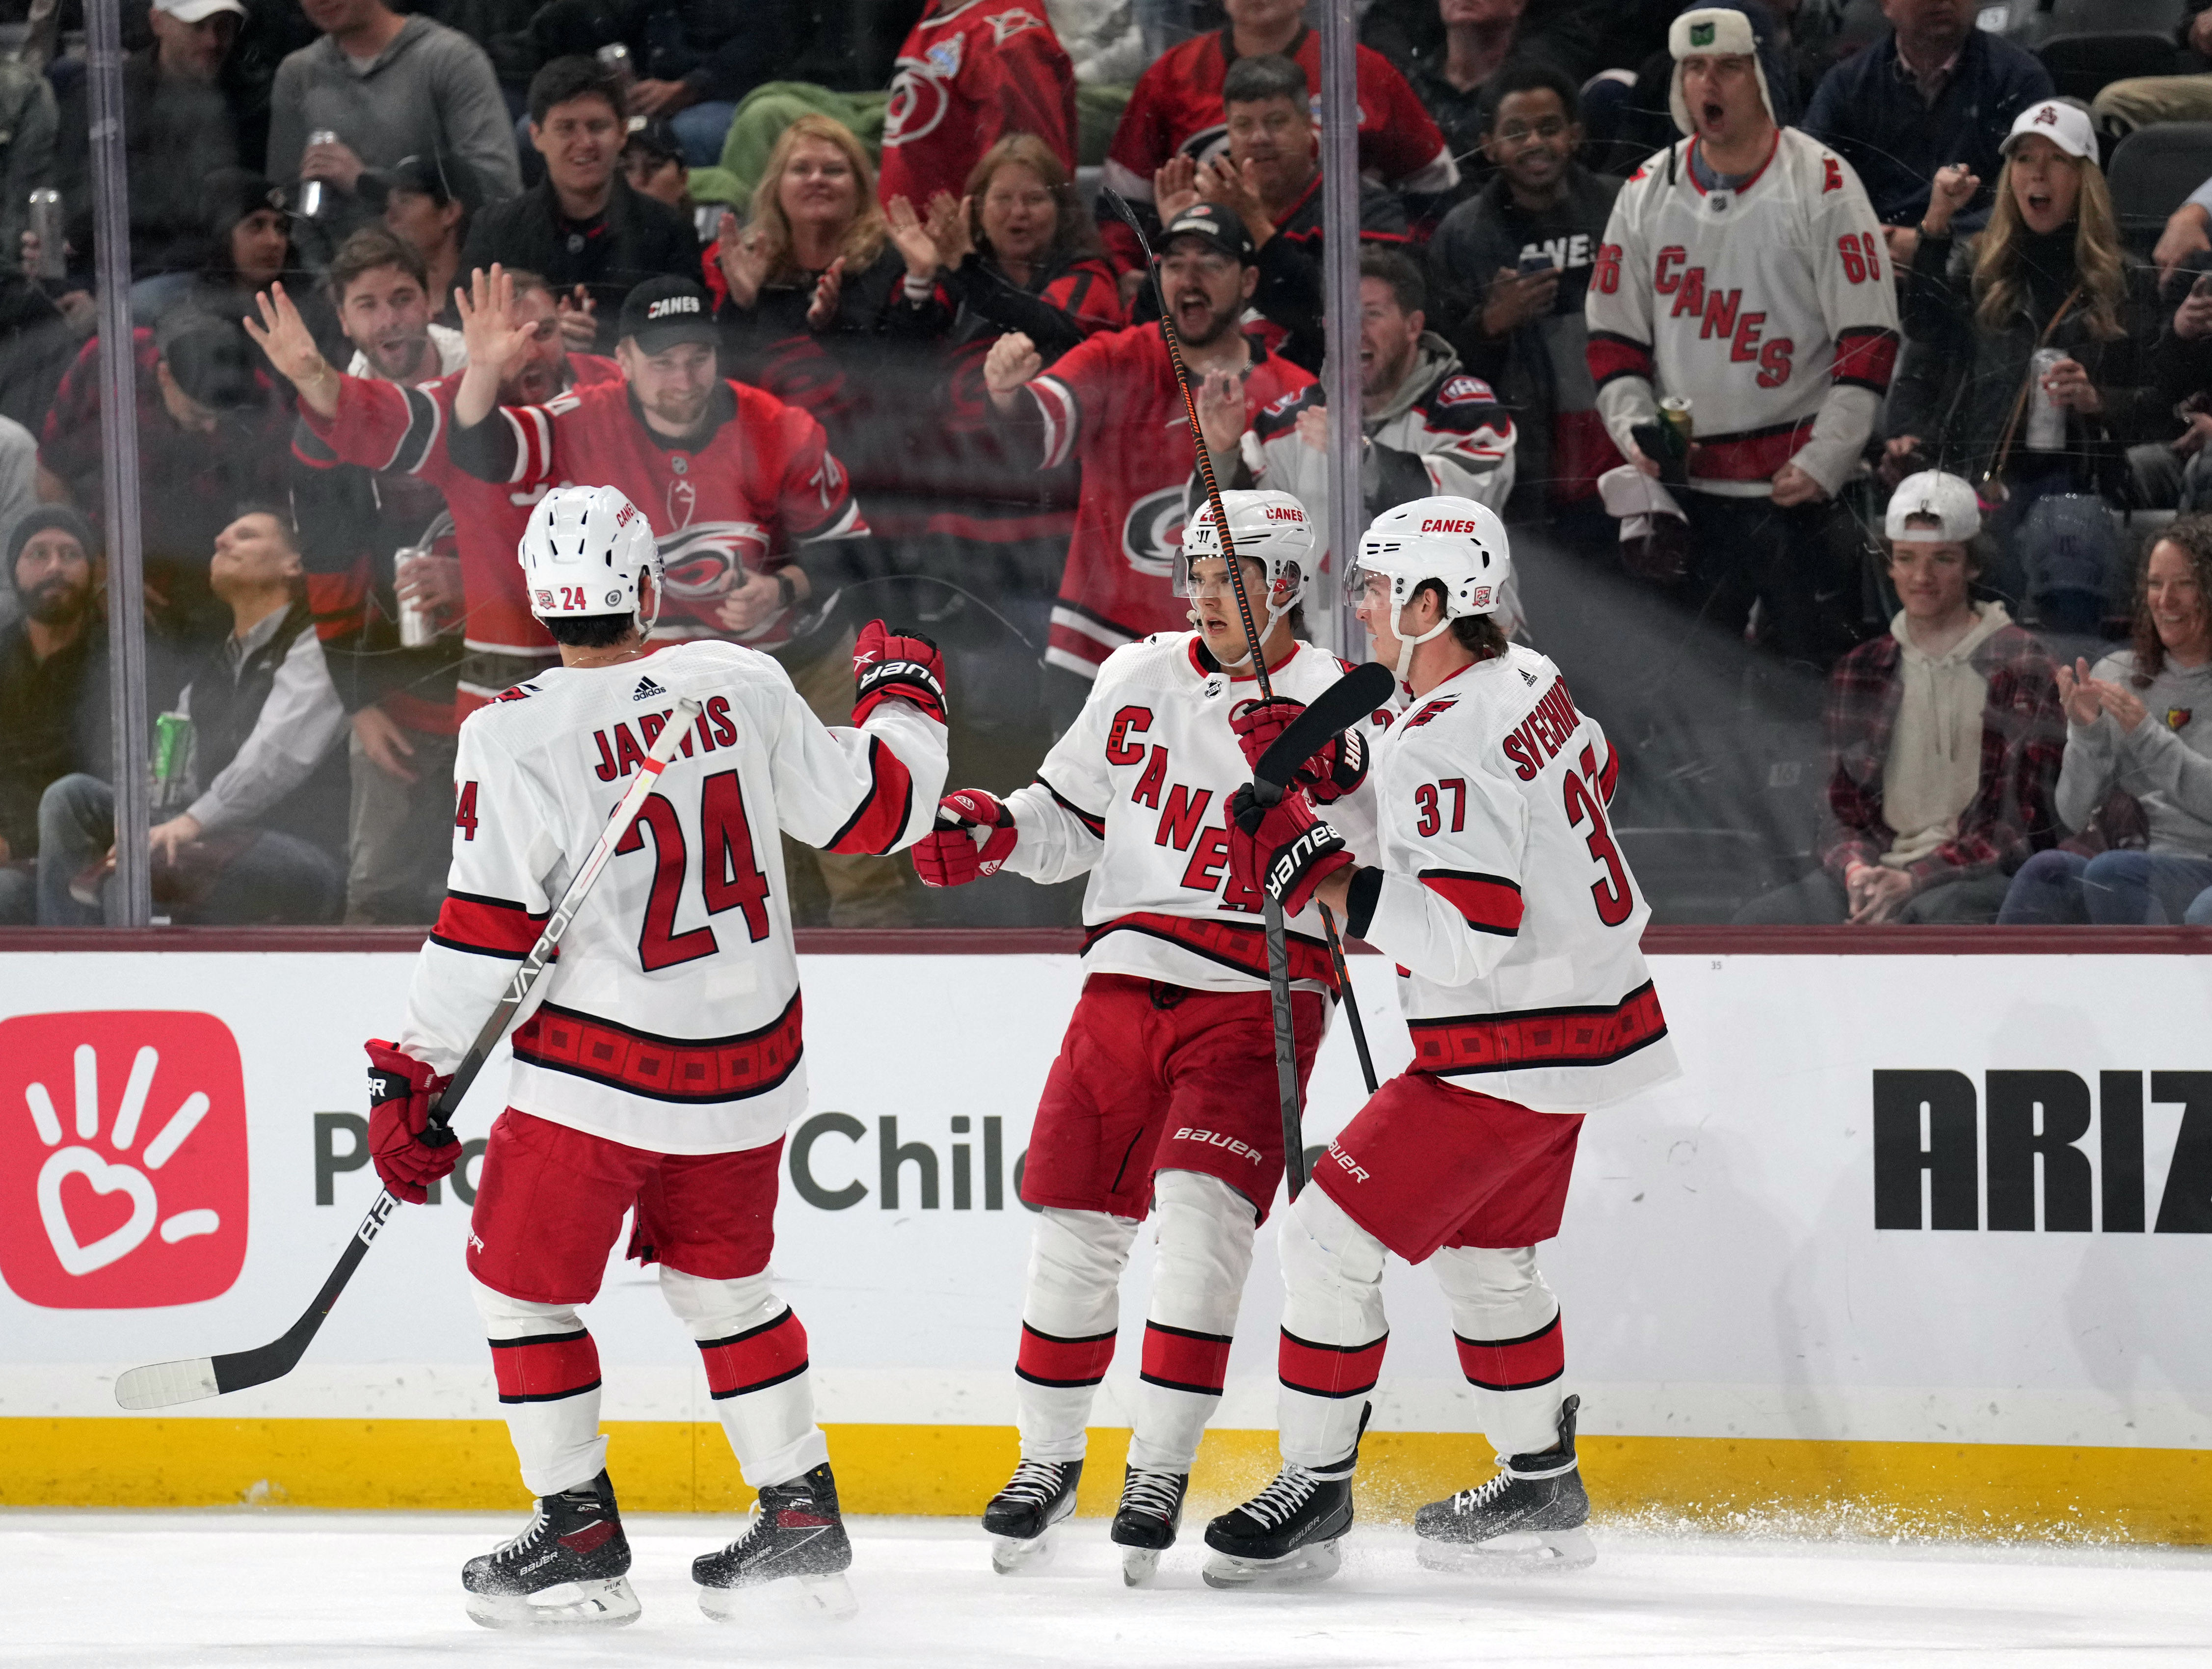 Aho scores 2, Gostisbehere helps Hurricanes beat Coyotes 6-1 - The